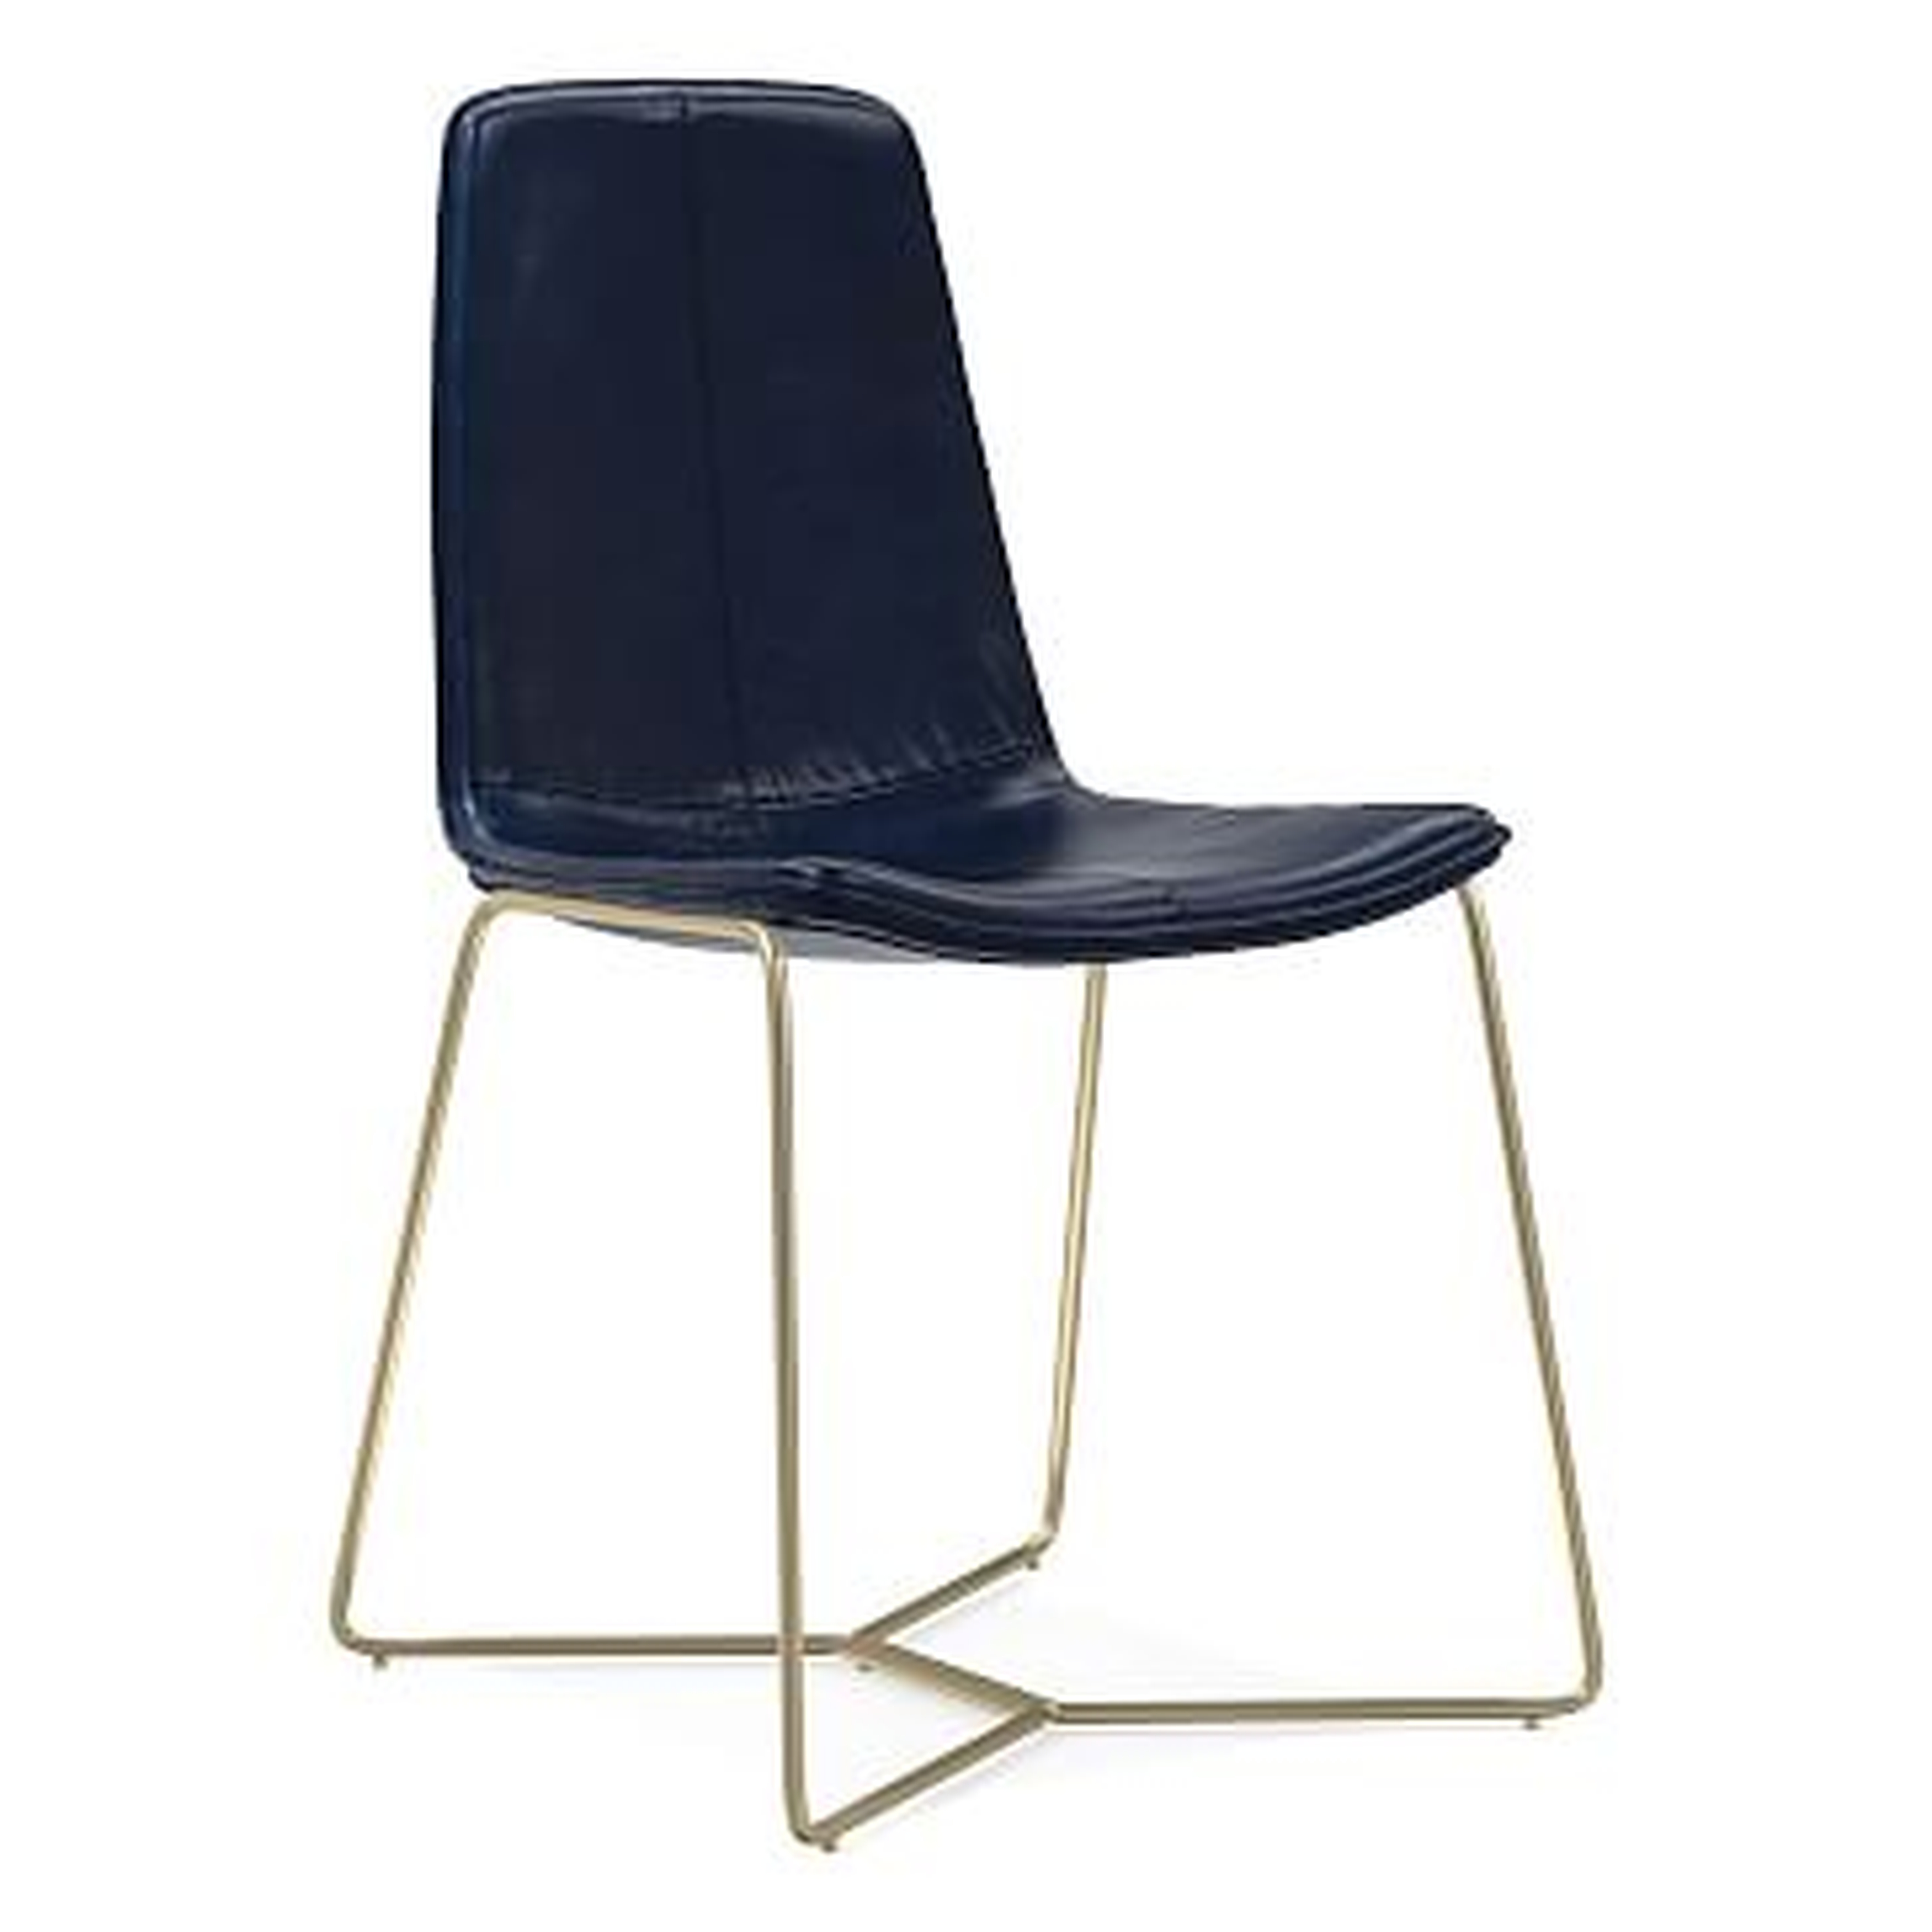 Slope Dining Chair, Ludlow Leather, Navy, Light Bronze - West Elm